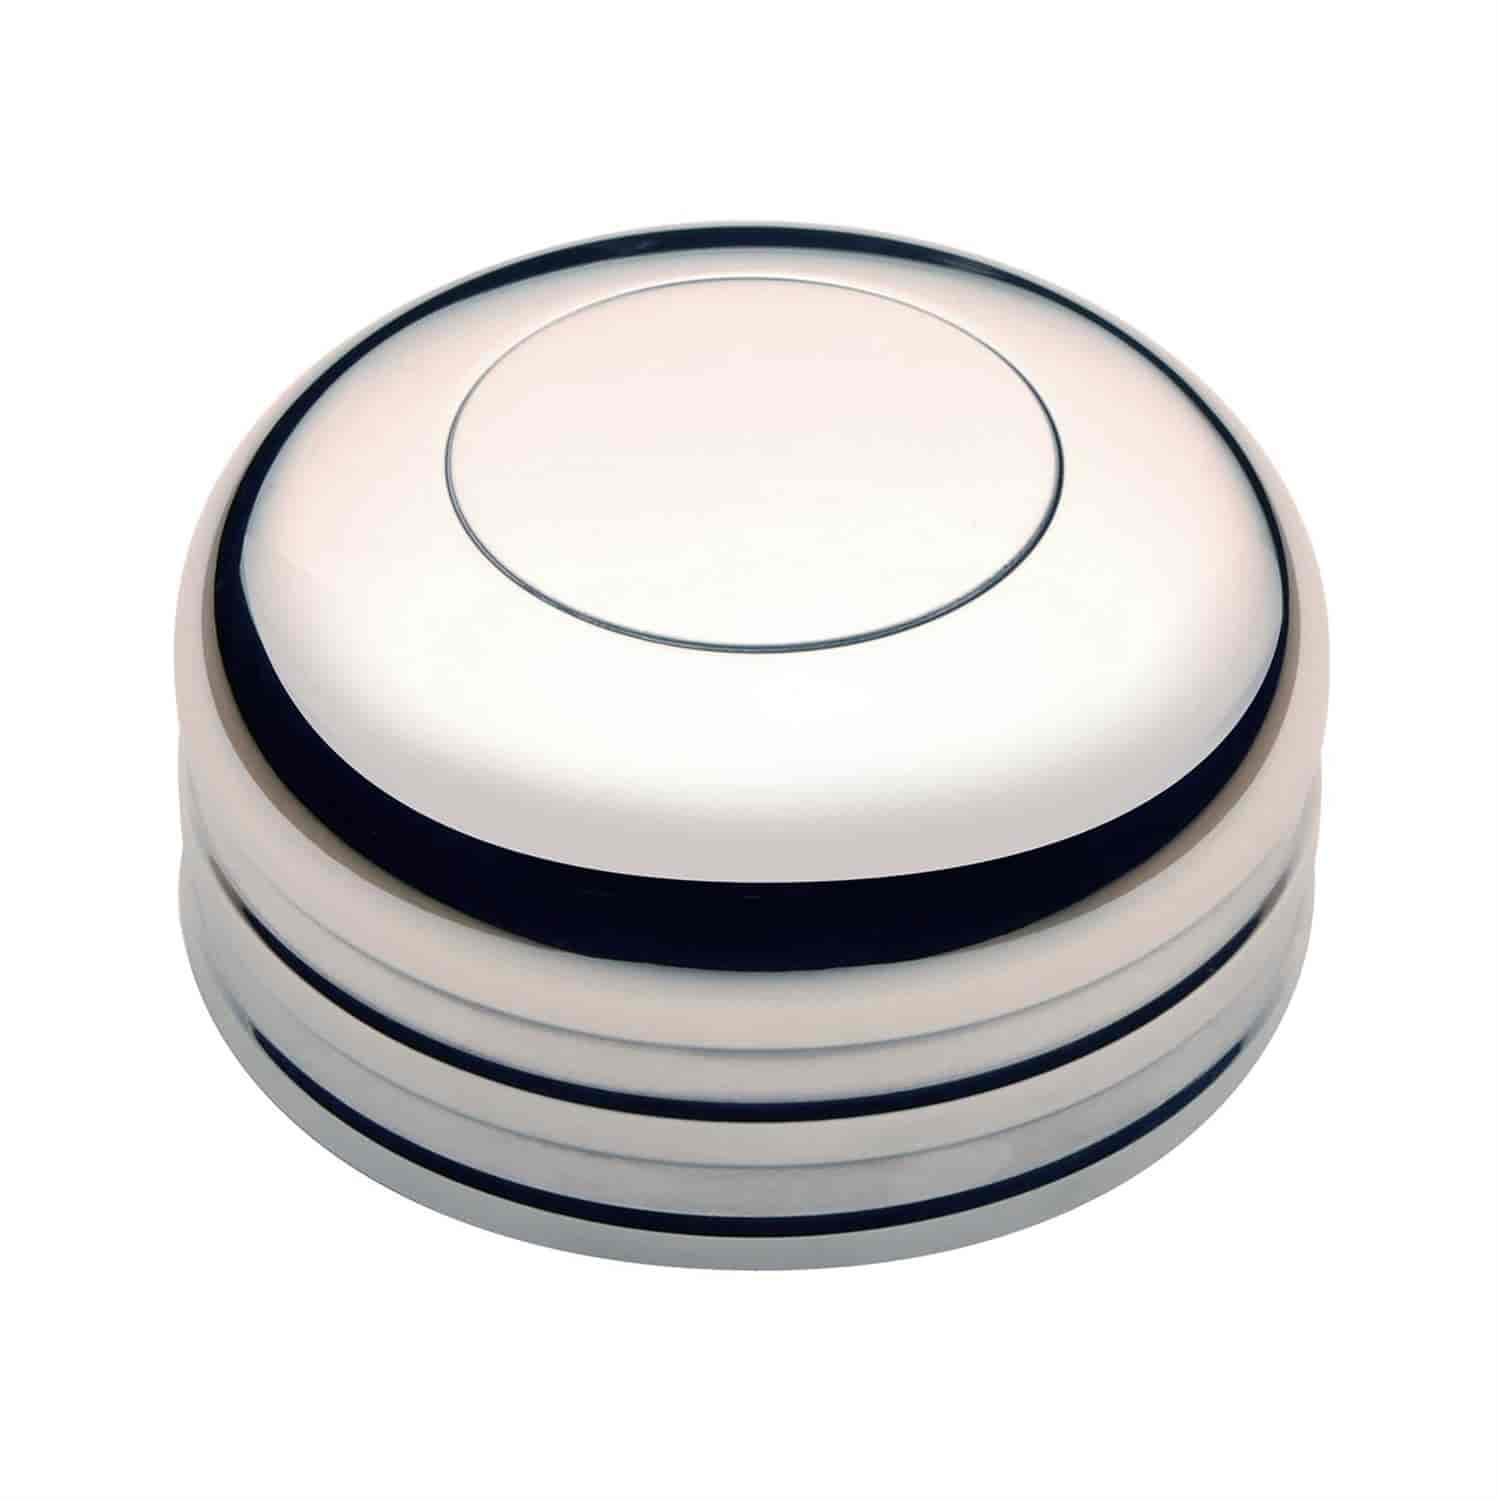 GT3 Low-Profile Horn Button w/Spacer Diameter: 3